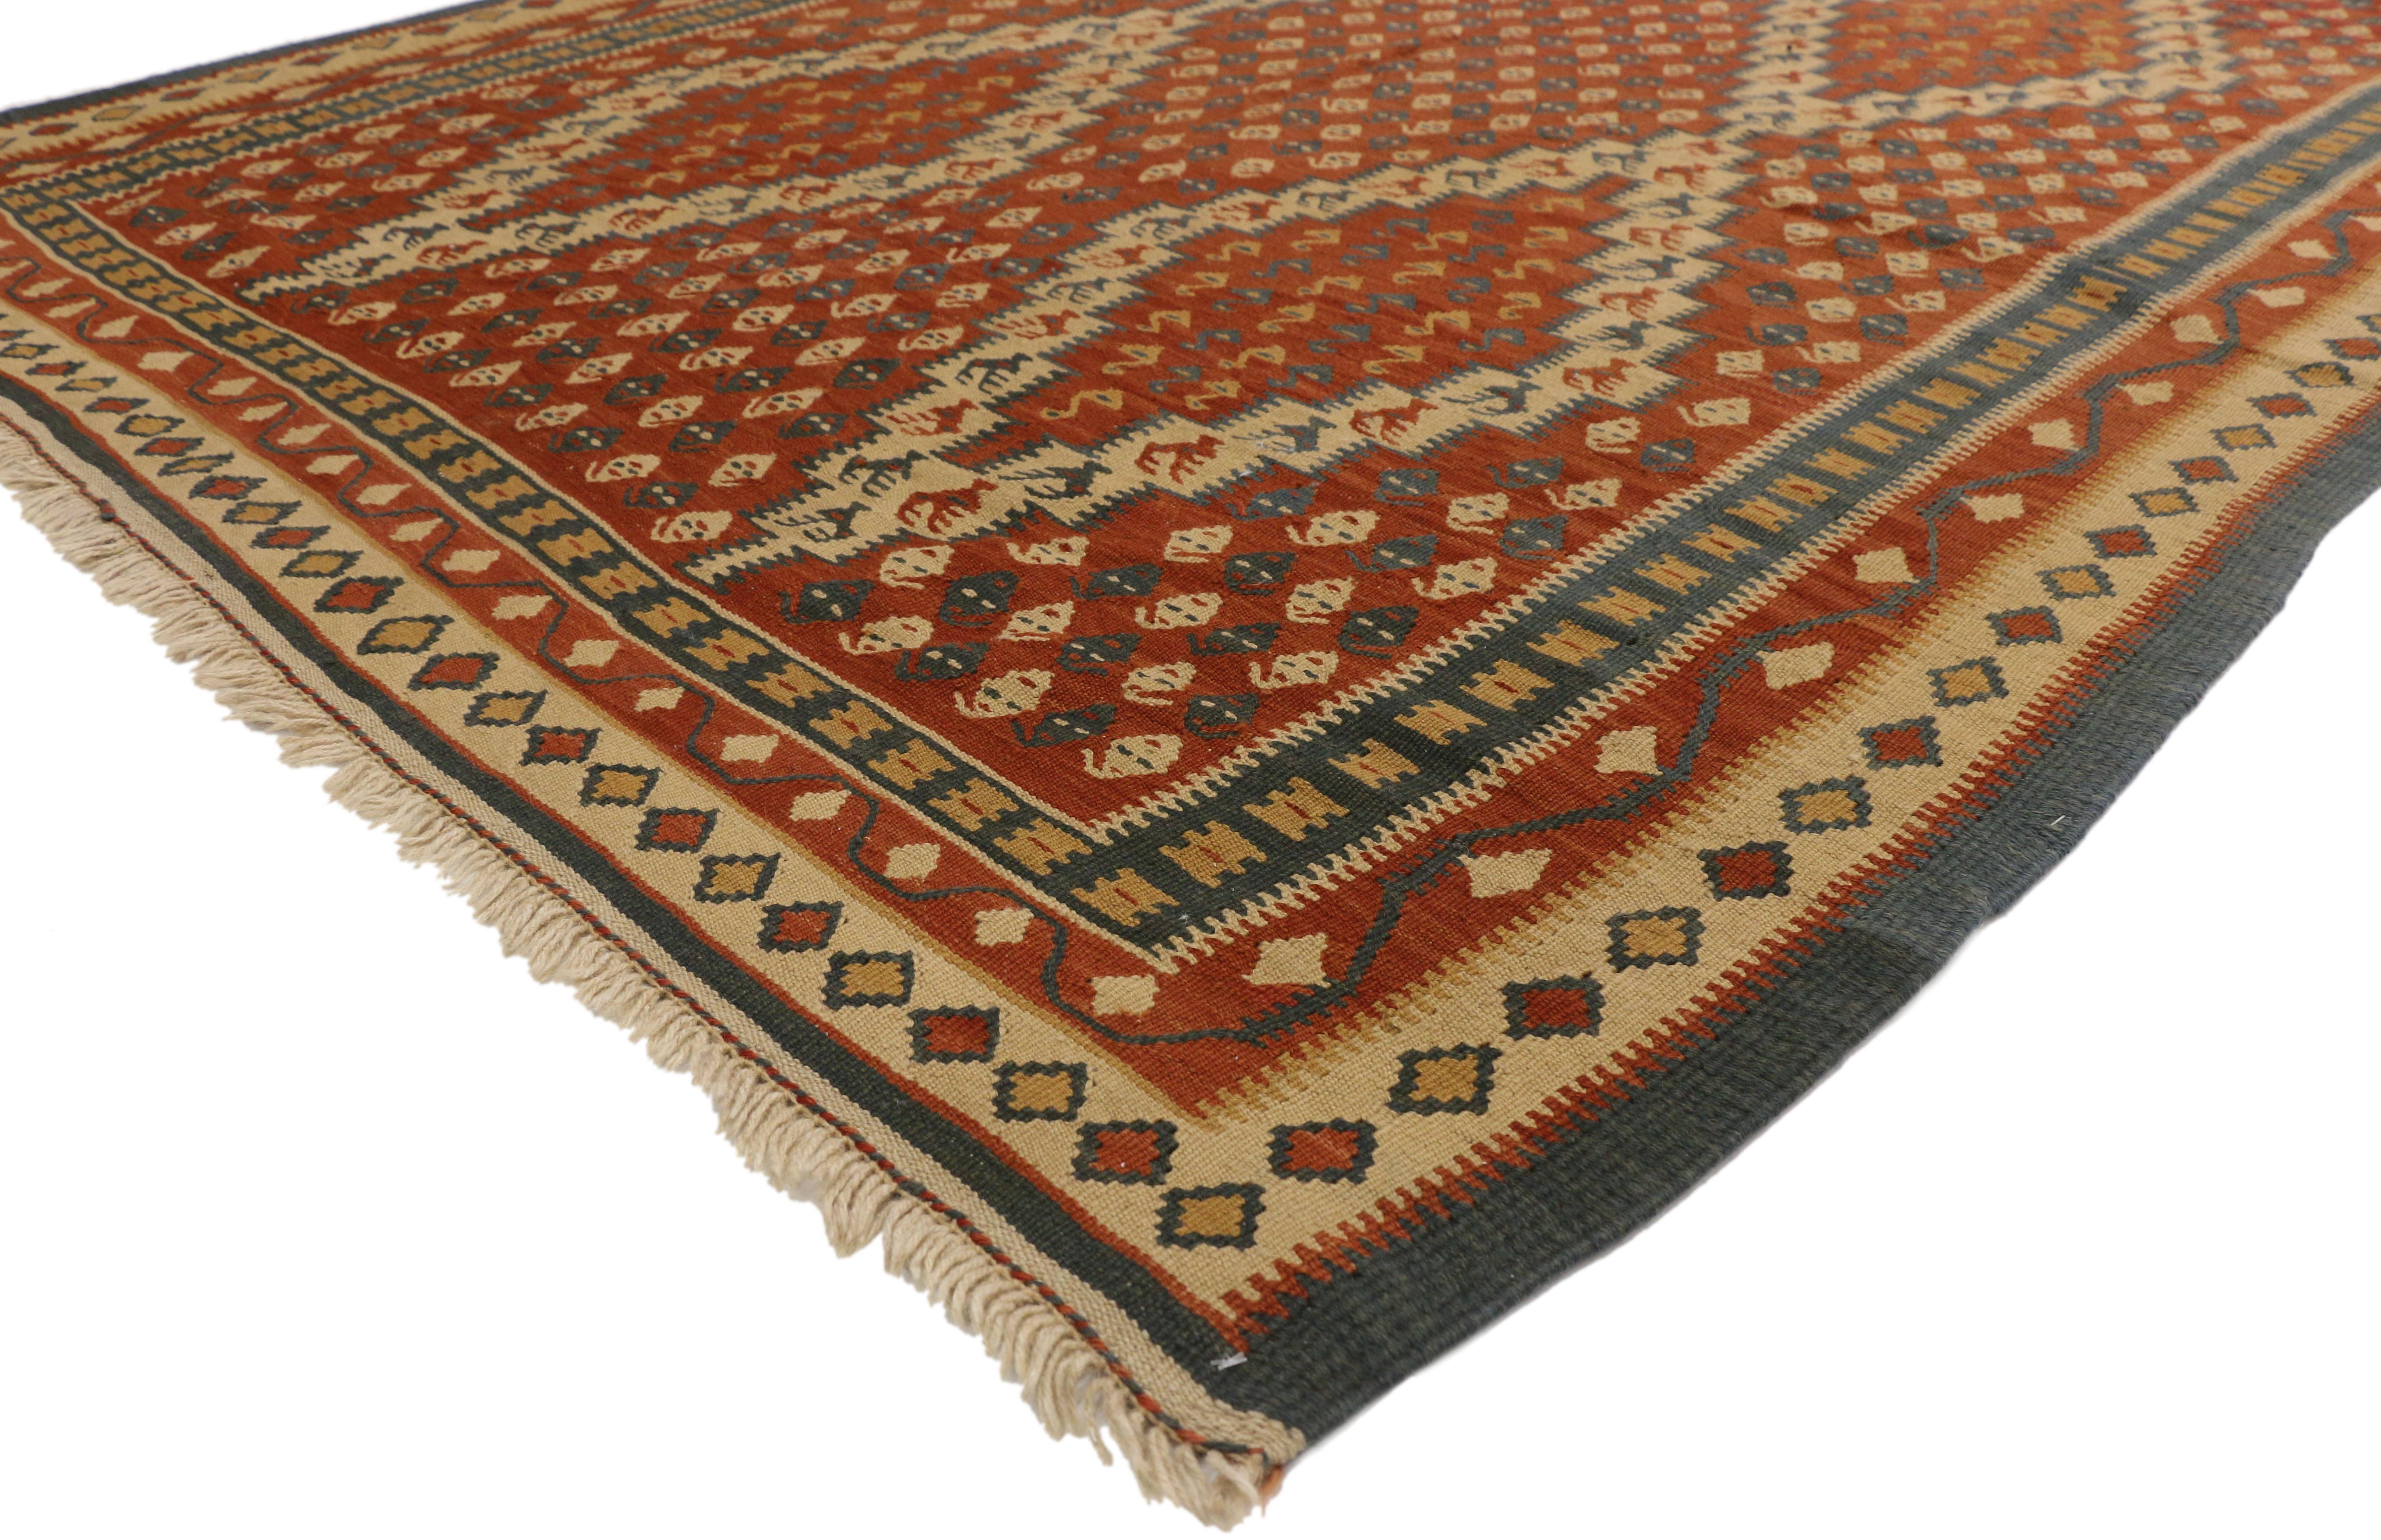 77294 Vintage Persian Kilim Rug with Nomadic Tribal Style 06'06 x 11'09. This handwoven wool vintage Persian Kilim area rug features two vertical columns of three stacked lozenges filled with repeating Cengel Hook motifs and outlined with beige